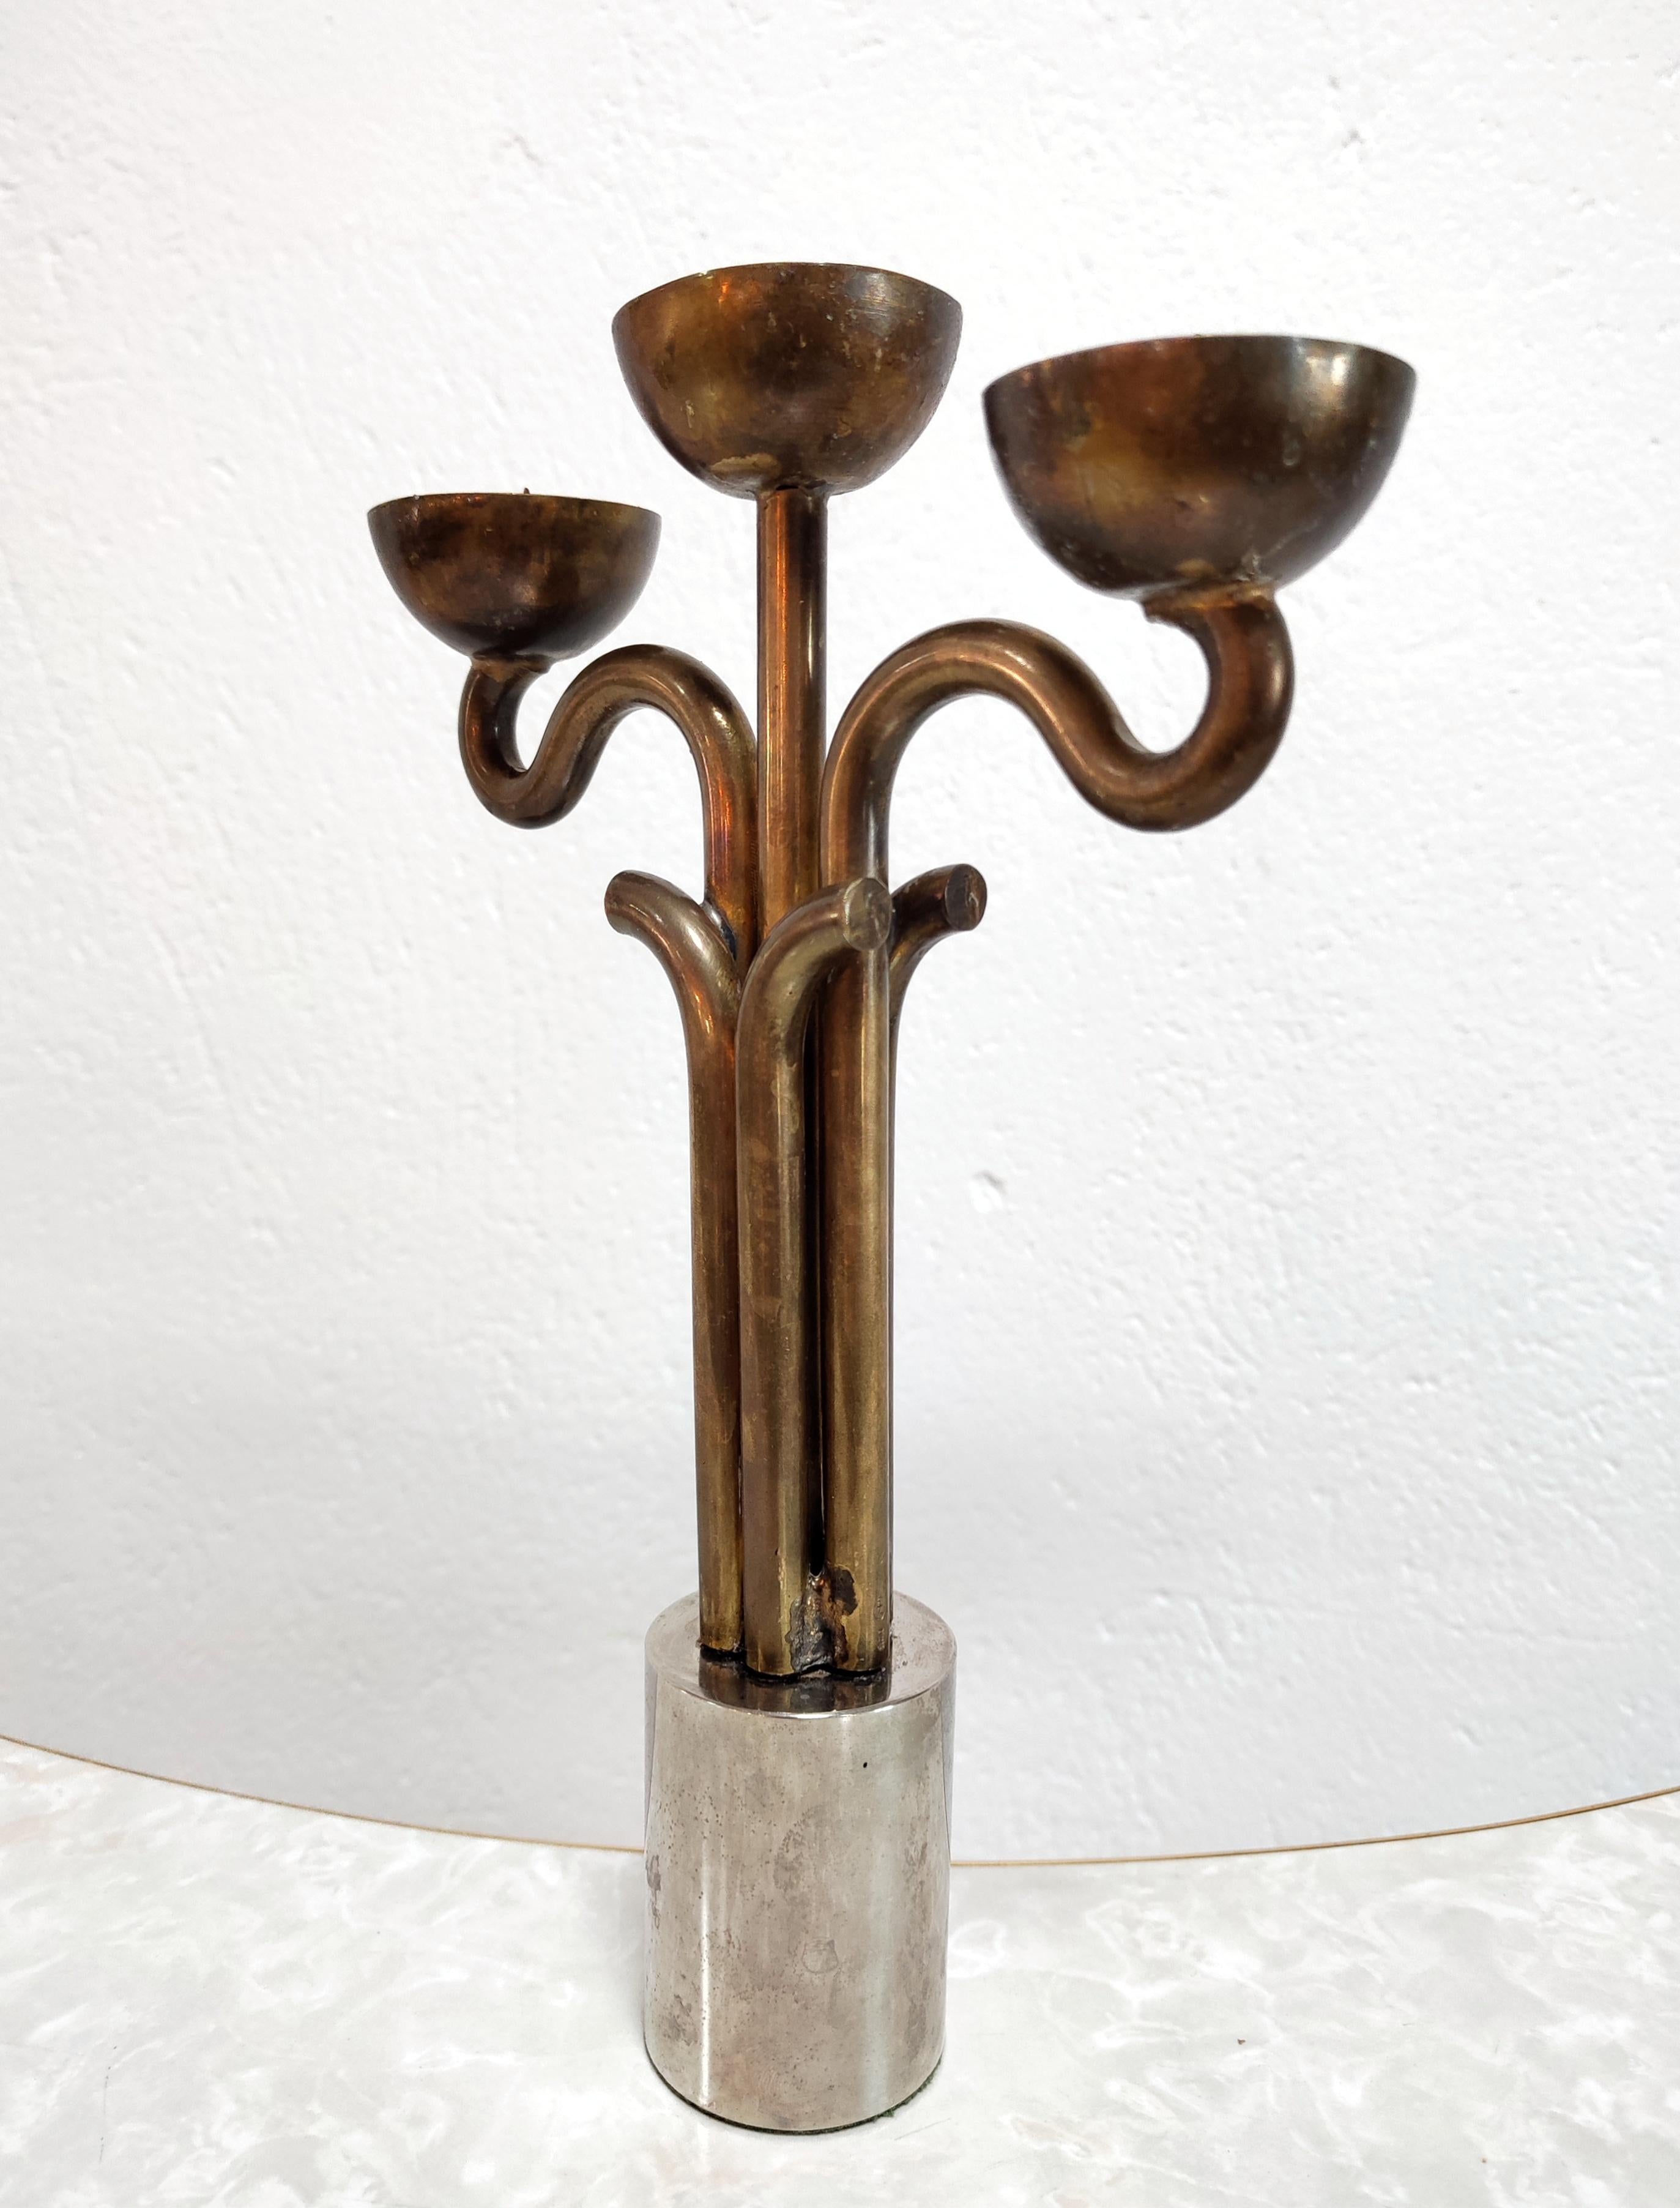 Brutalist Candlestick Holder Done in Brass and Nickel, Italy, 1970s For Sale 4